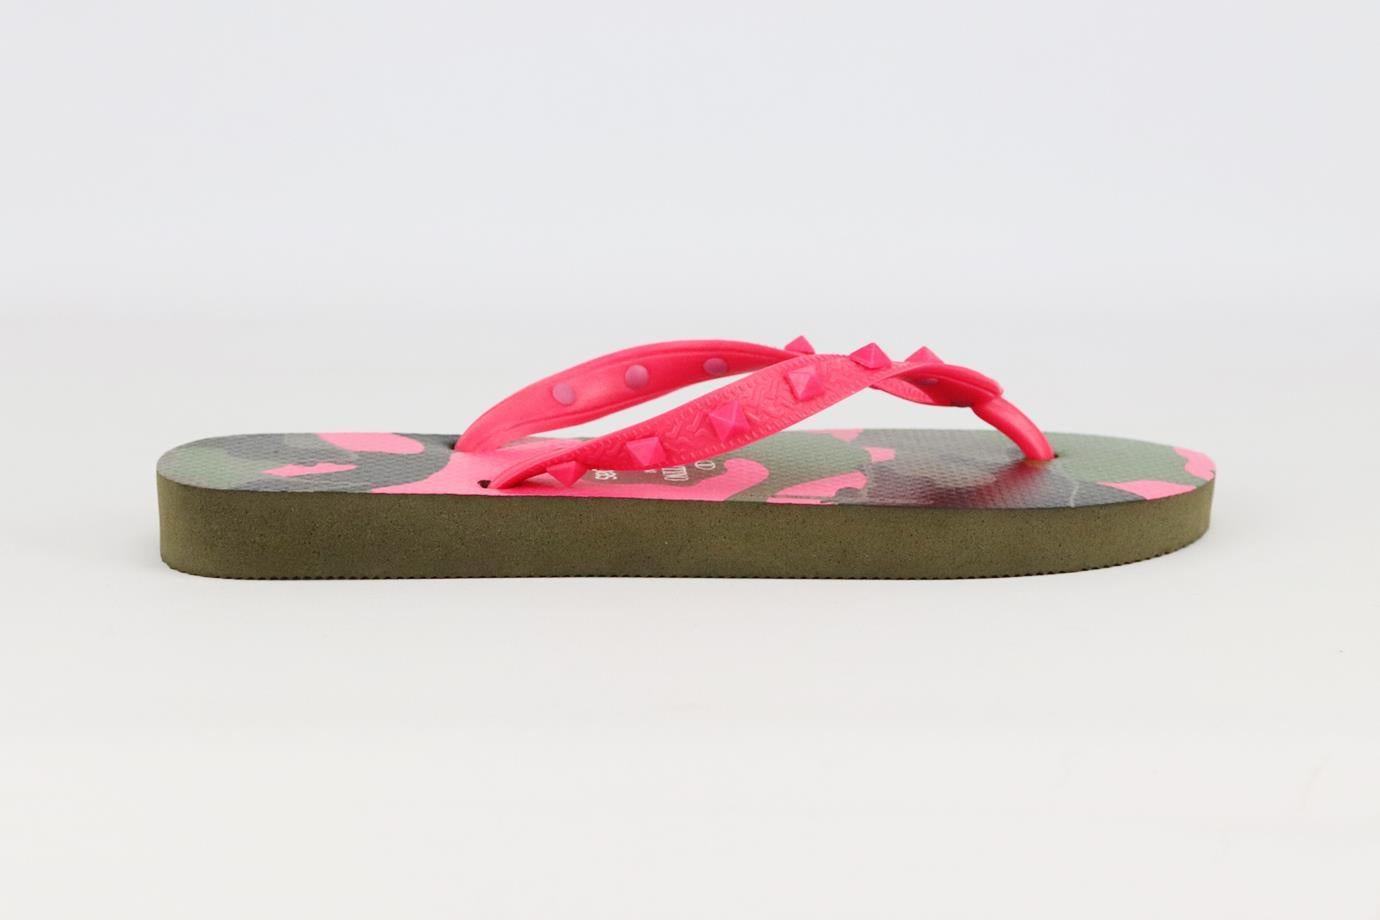 Valentino Garavani + Havaianas Rockstud camouflage print flip flops. Neon-pink, khaki, black and brown. Slips on. Does not come with box or dustbag. Size: EU 37/38 (UK 4/5, US 7/8). Insole: 10 in. Heel: 0.5 in
